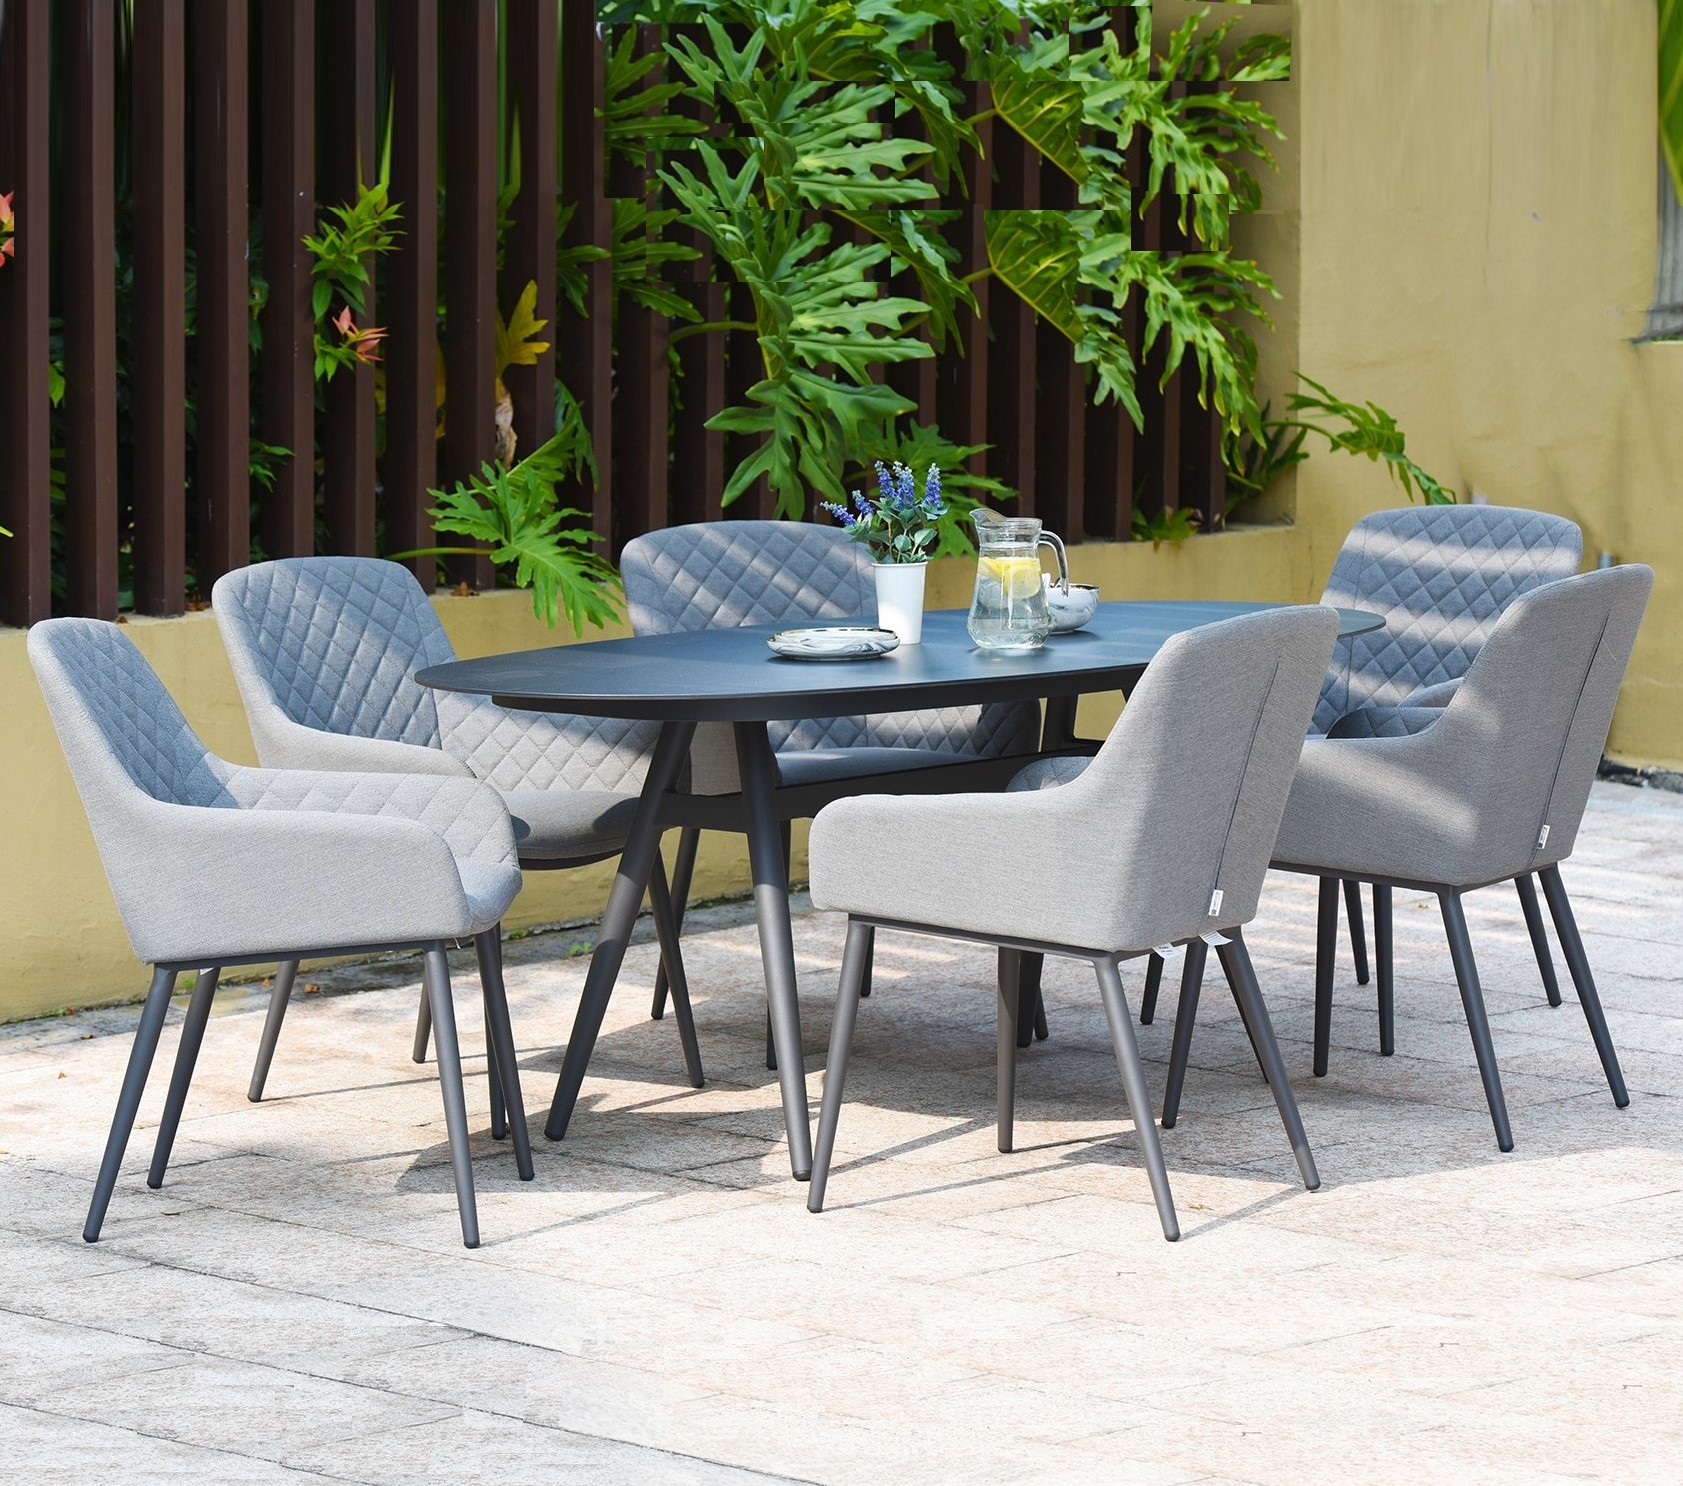 All Weather Fabric Garden Dining Chairs - Outdoor Furniture | Shinlin Patio Fabric Dining Table & Chairs C203-B